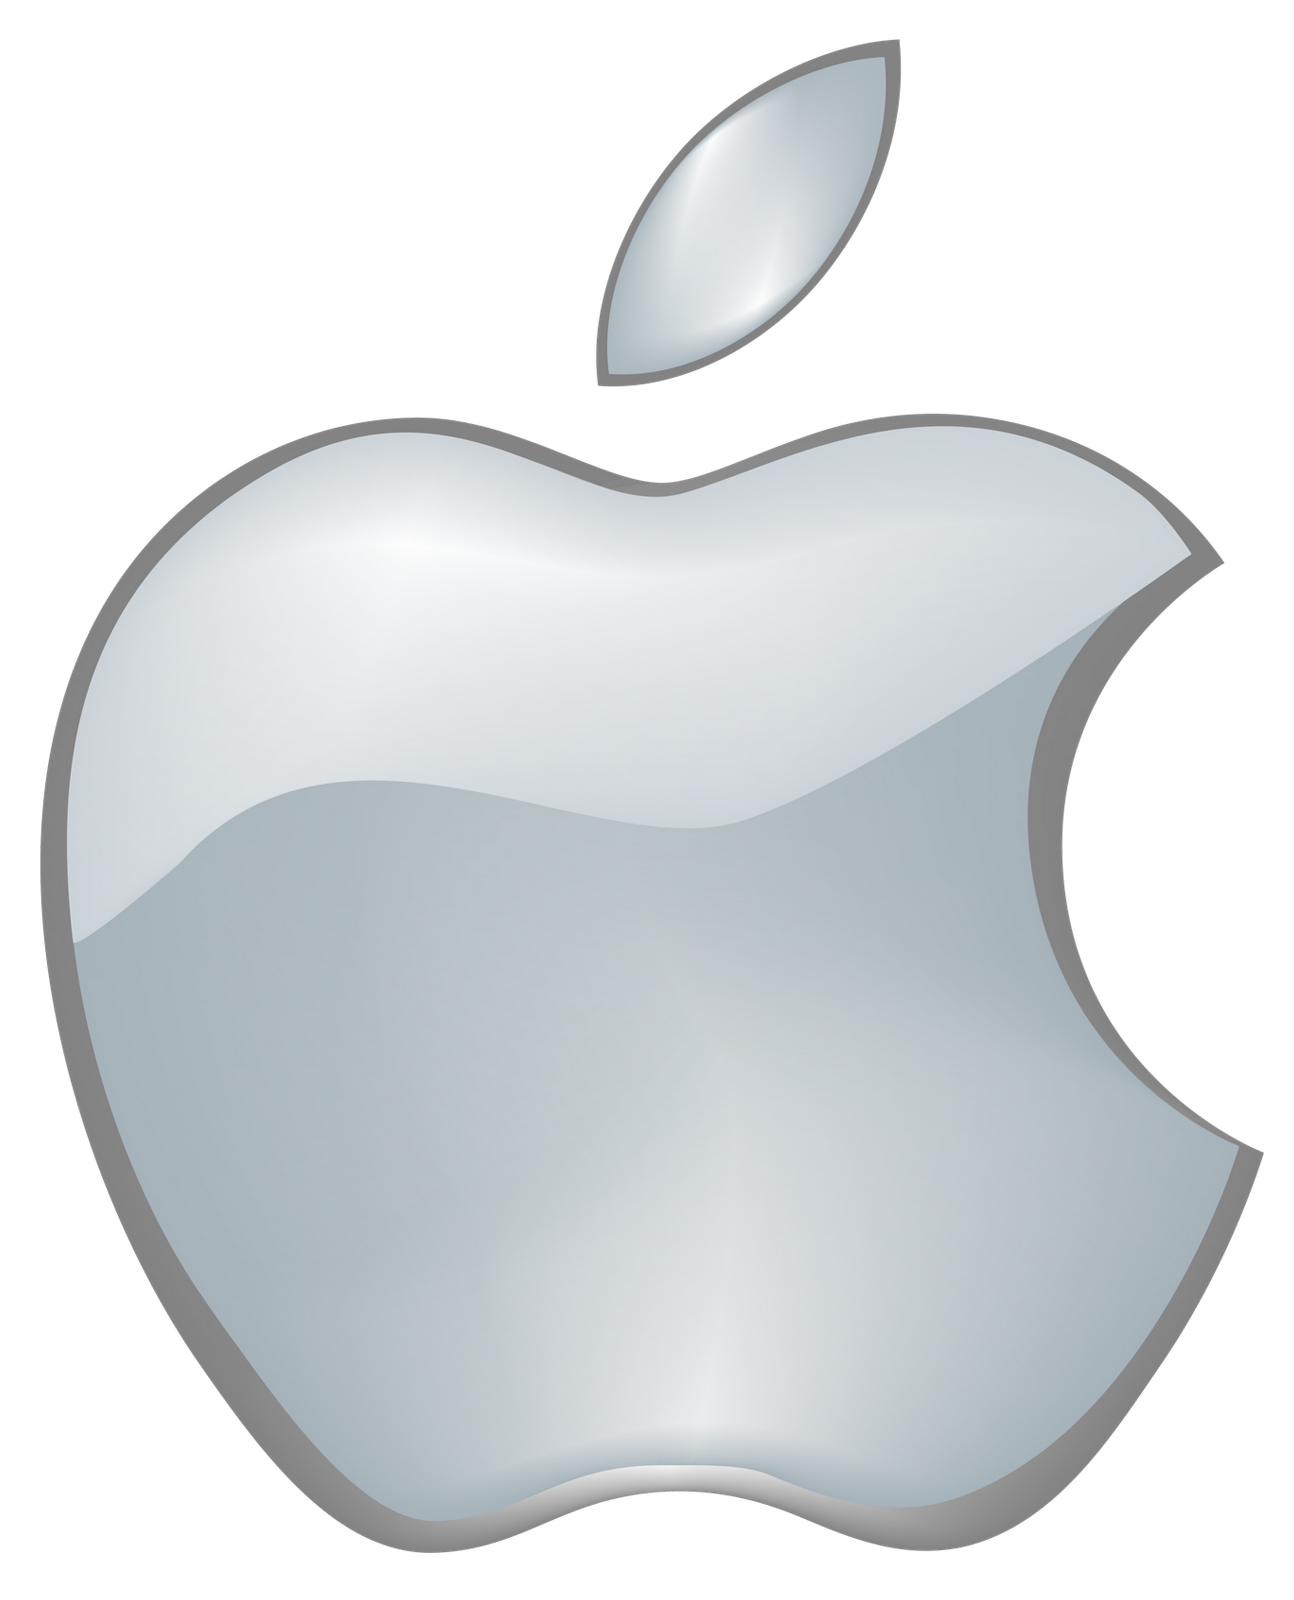 apple pages logo